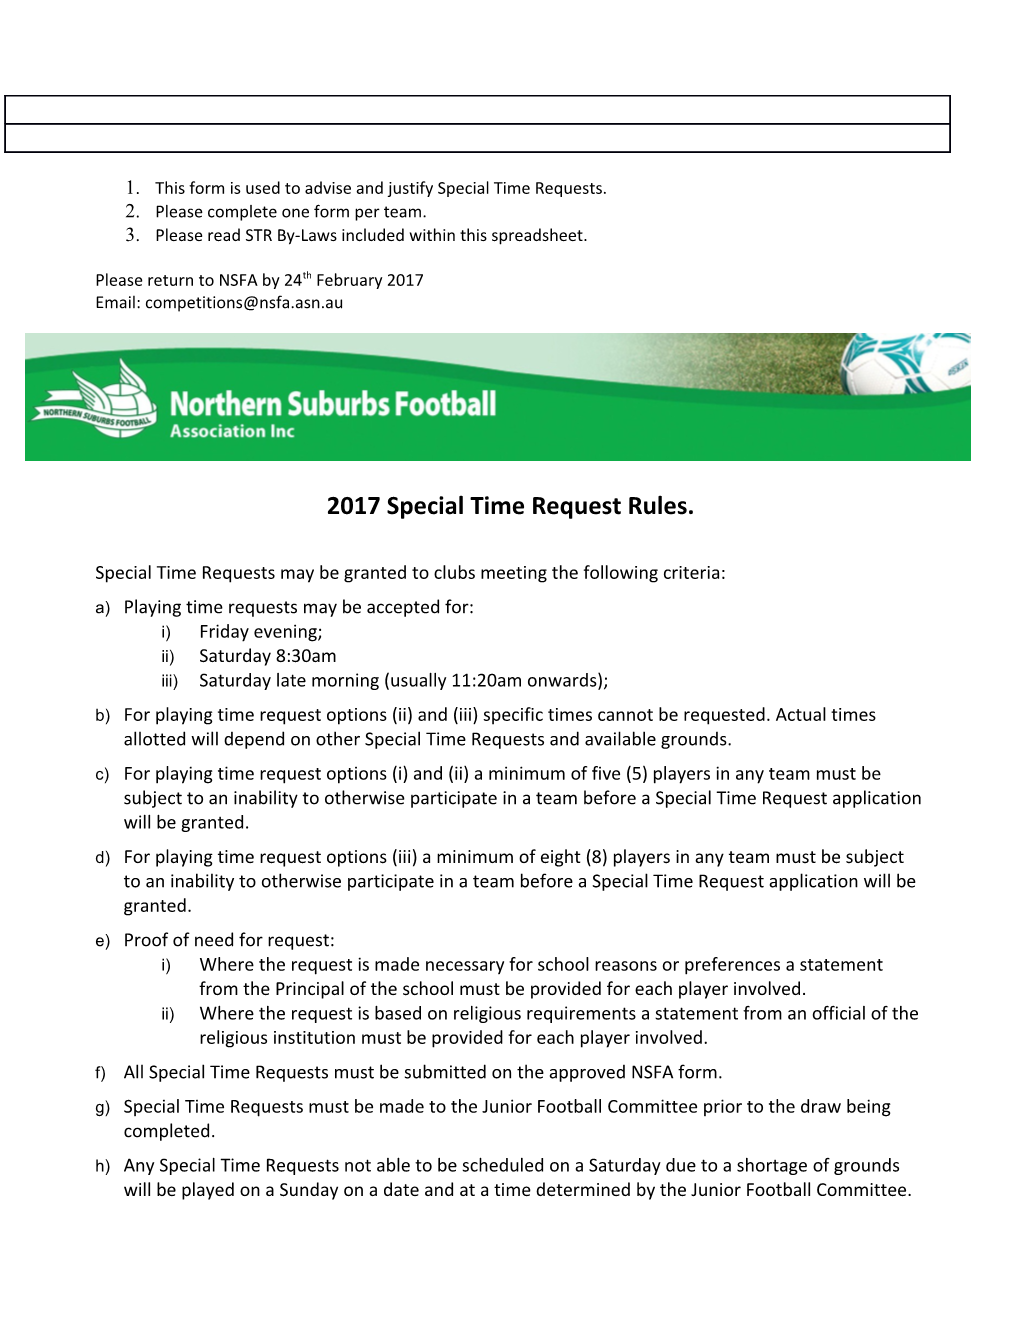 2017 Special Time Request Rules